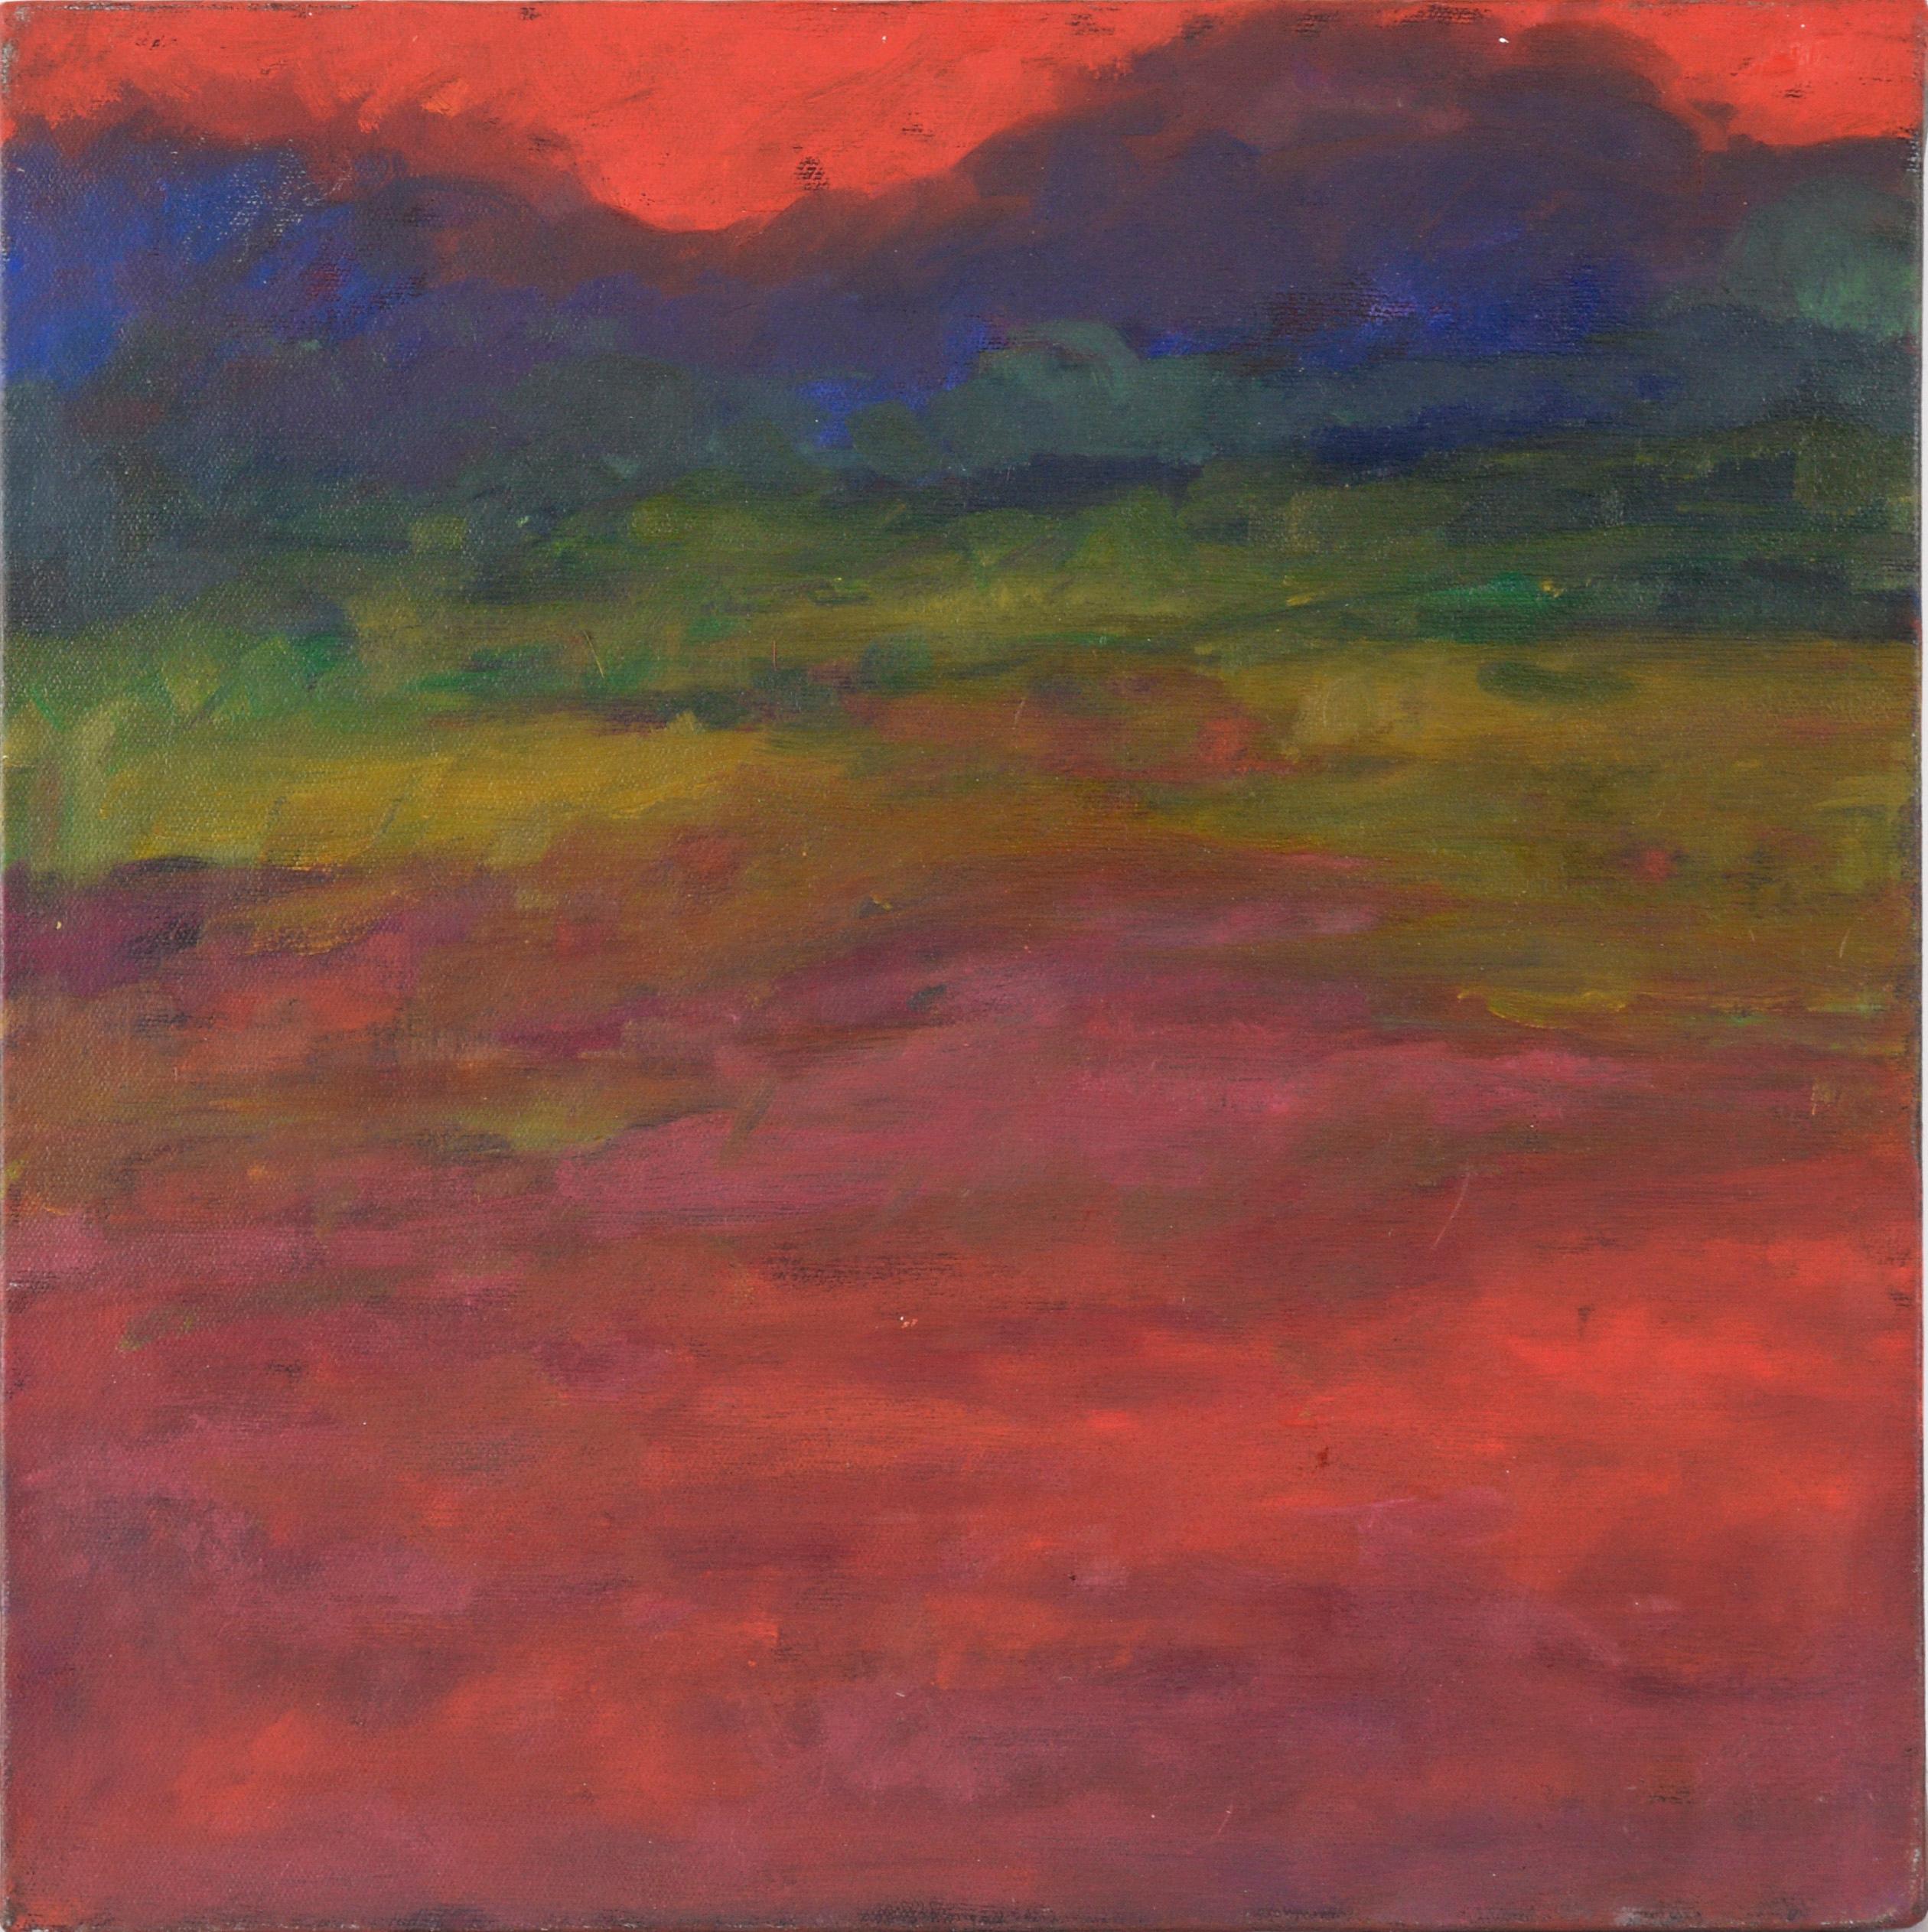 M. Pavao Abstract Painting - Glowing Red Sunset - Abstracted Landscape in Acrylic on Canvas